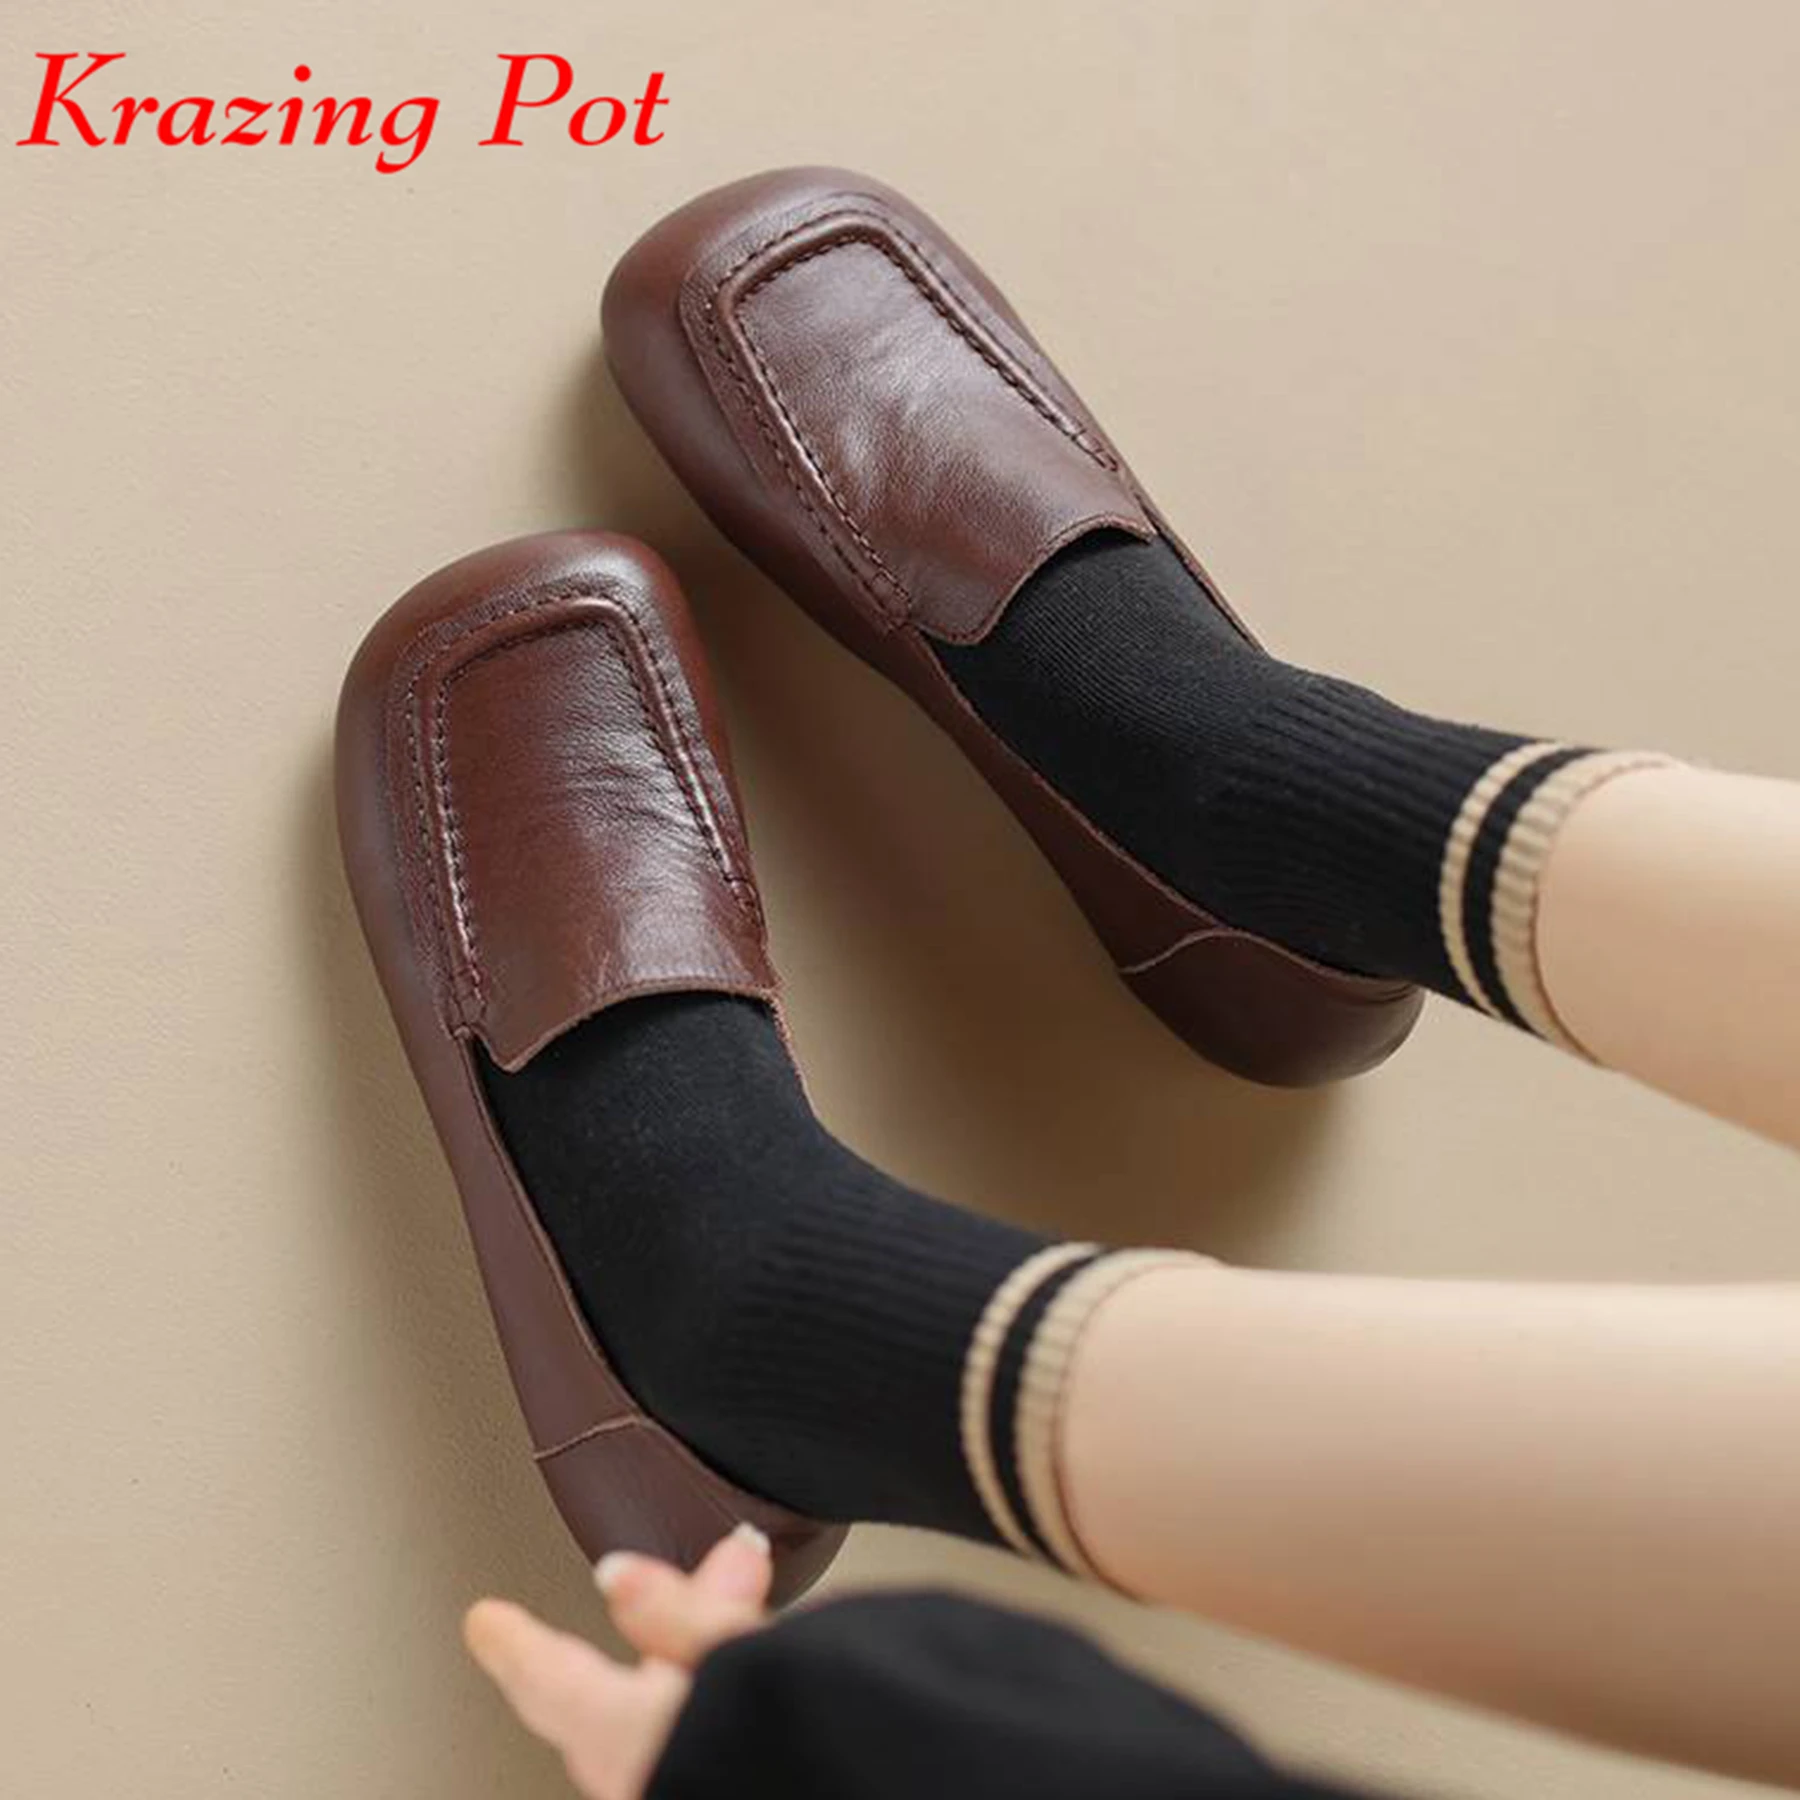 

Krazing Pot Genuine Leather Low Heels Spring Brand Maiden Shoes Round Toe Brand Concise Style High Quality Women Shallow Pumps